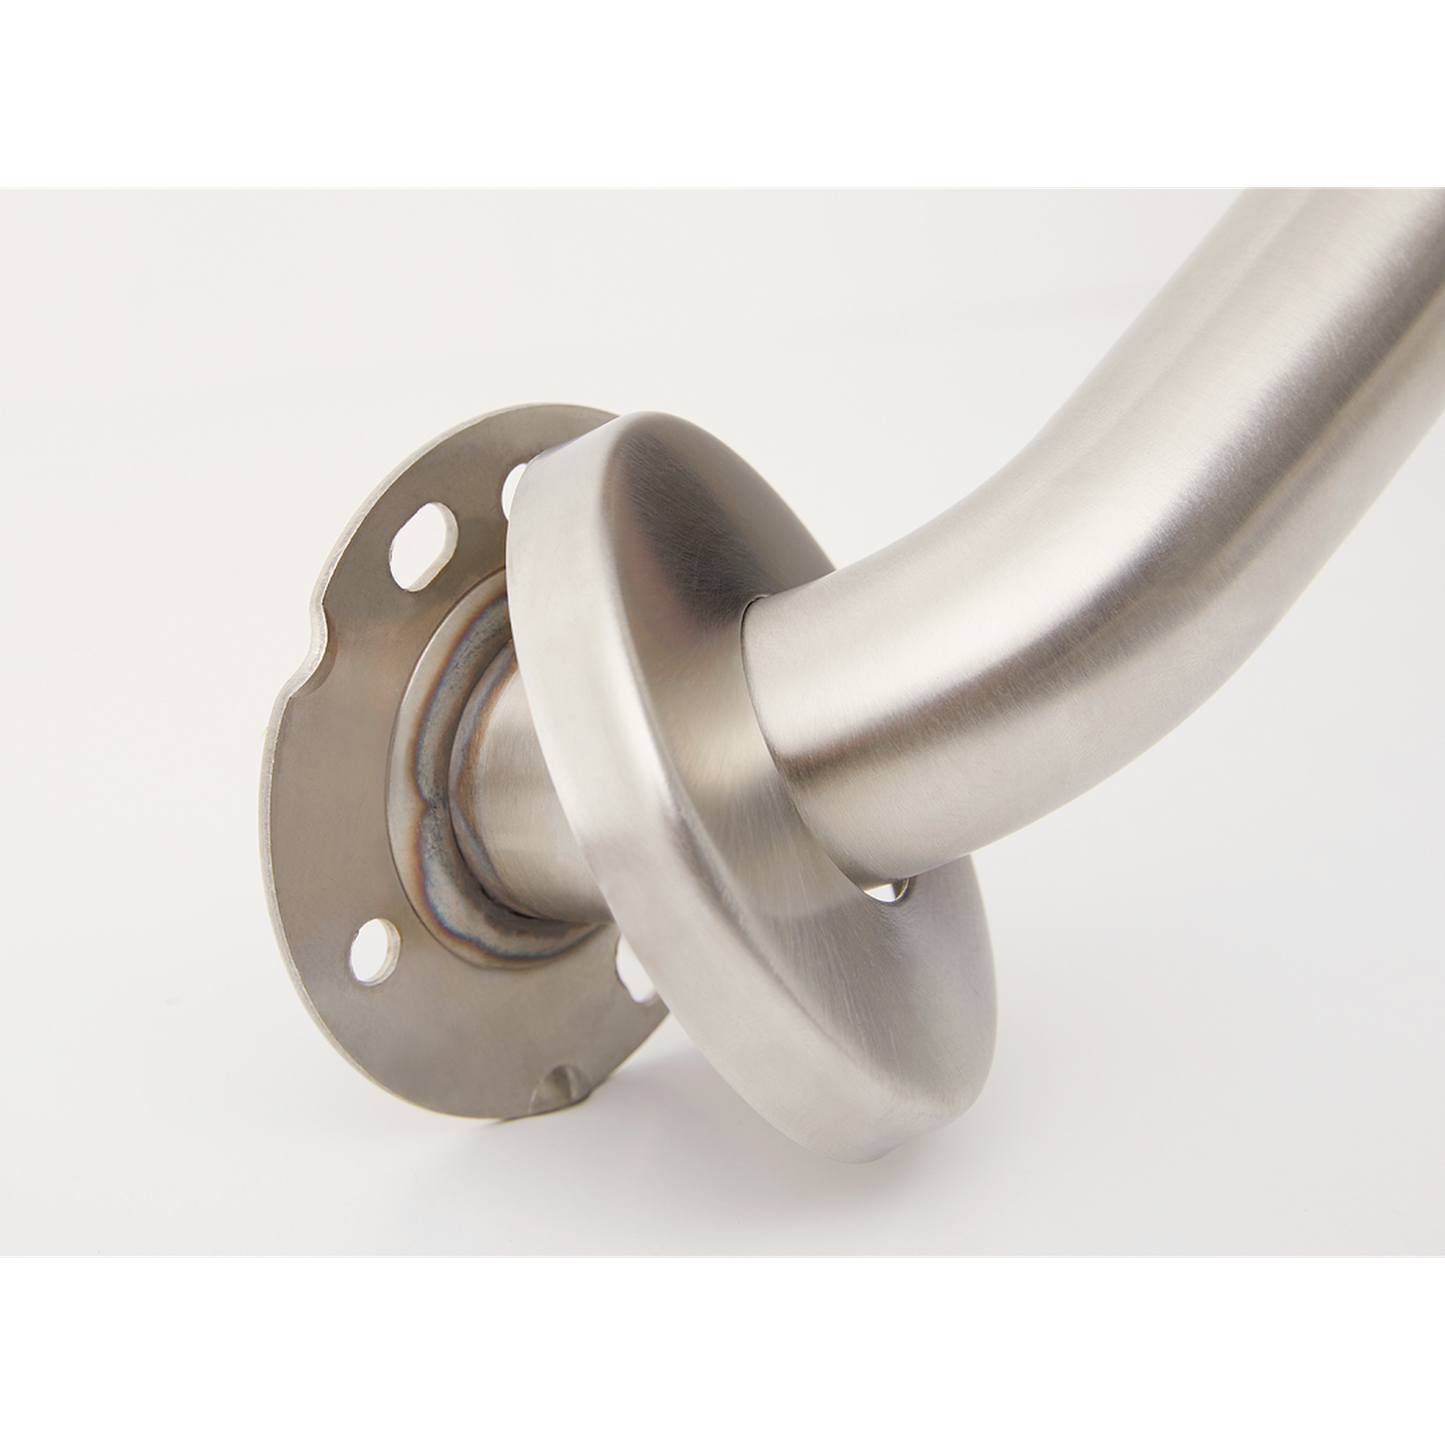 Seachrome Signature Series 36" Satin Stainless Steel 1.25 Diameter Concealed Flanges Bariatric Grab Bar